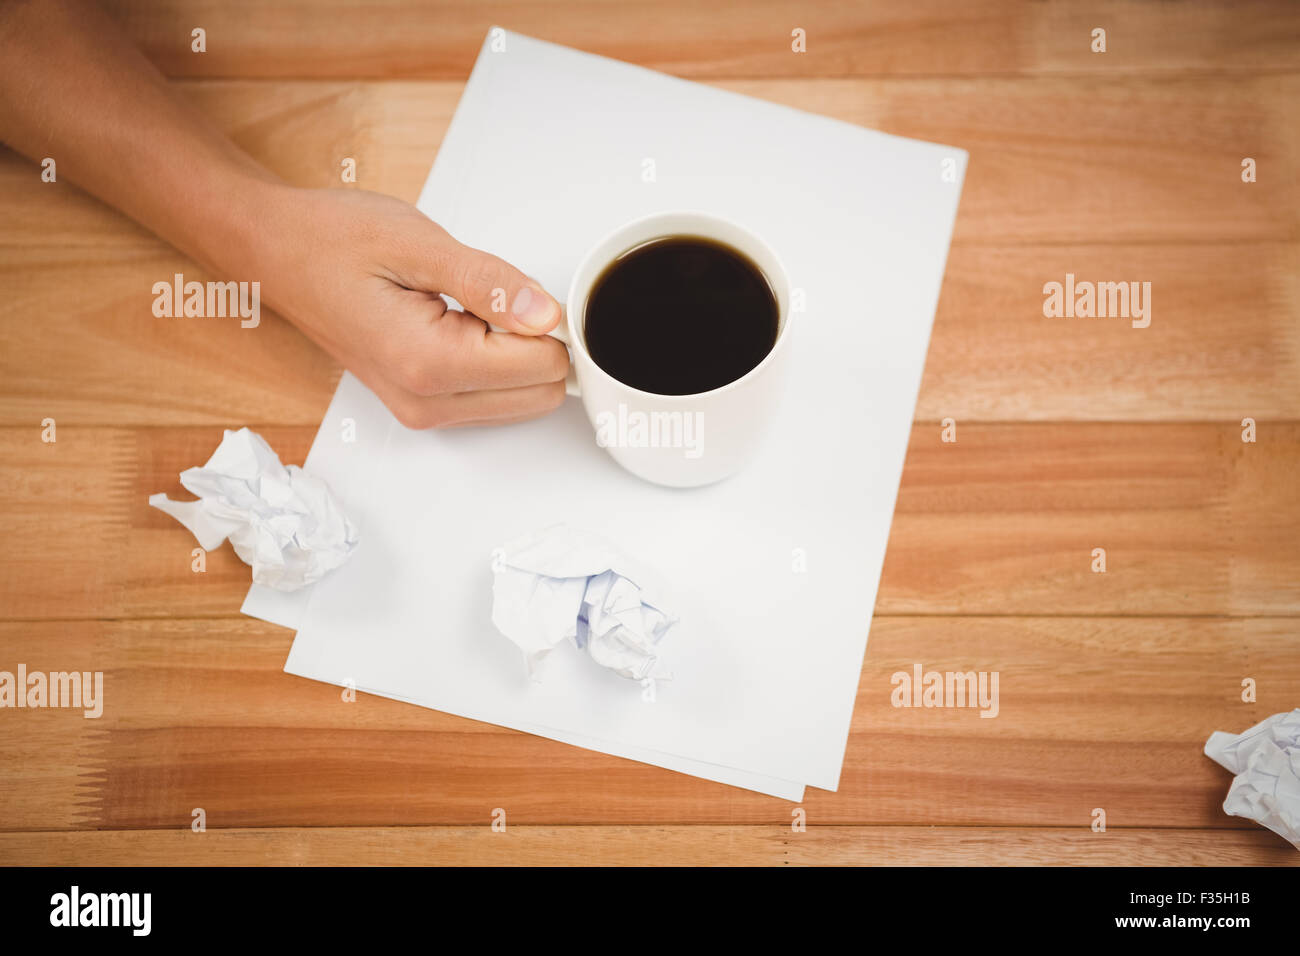 Man holding black coffee cup on paper at desk Stock Photo